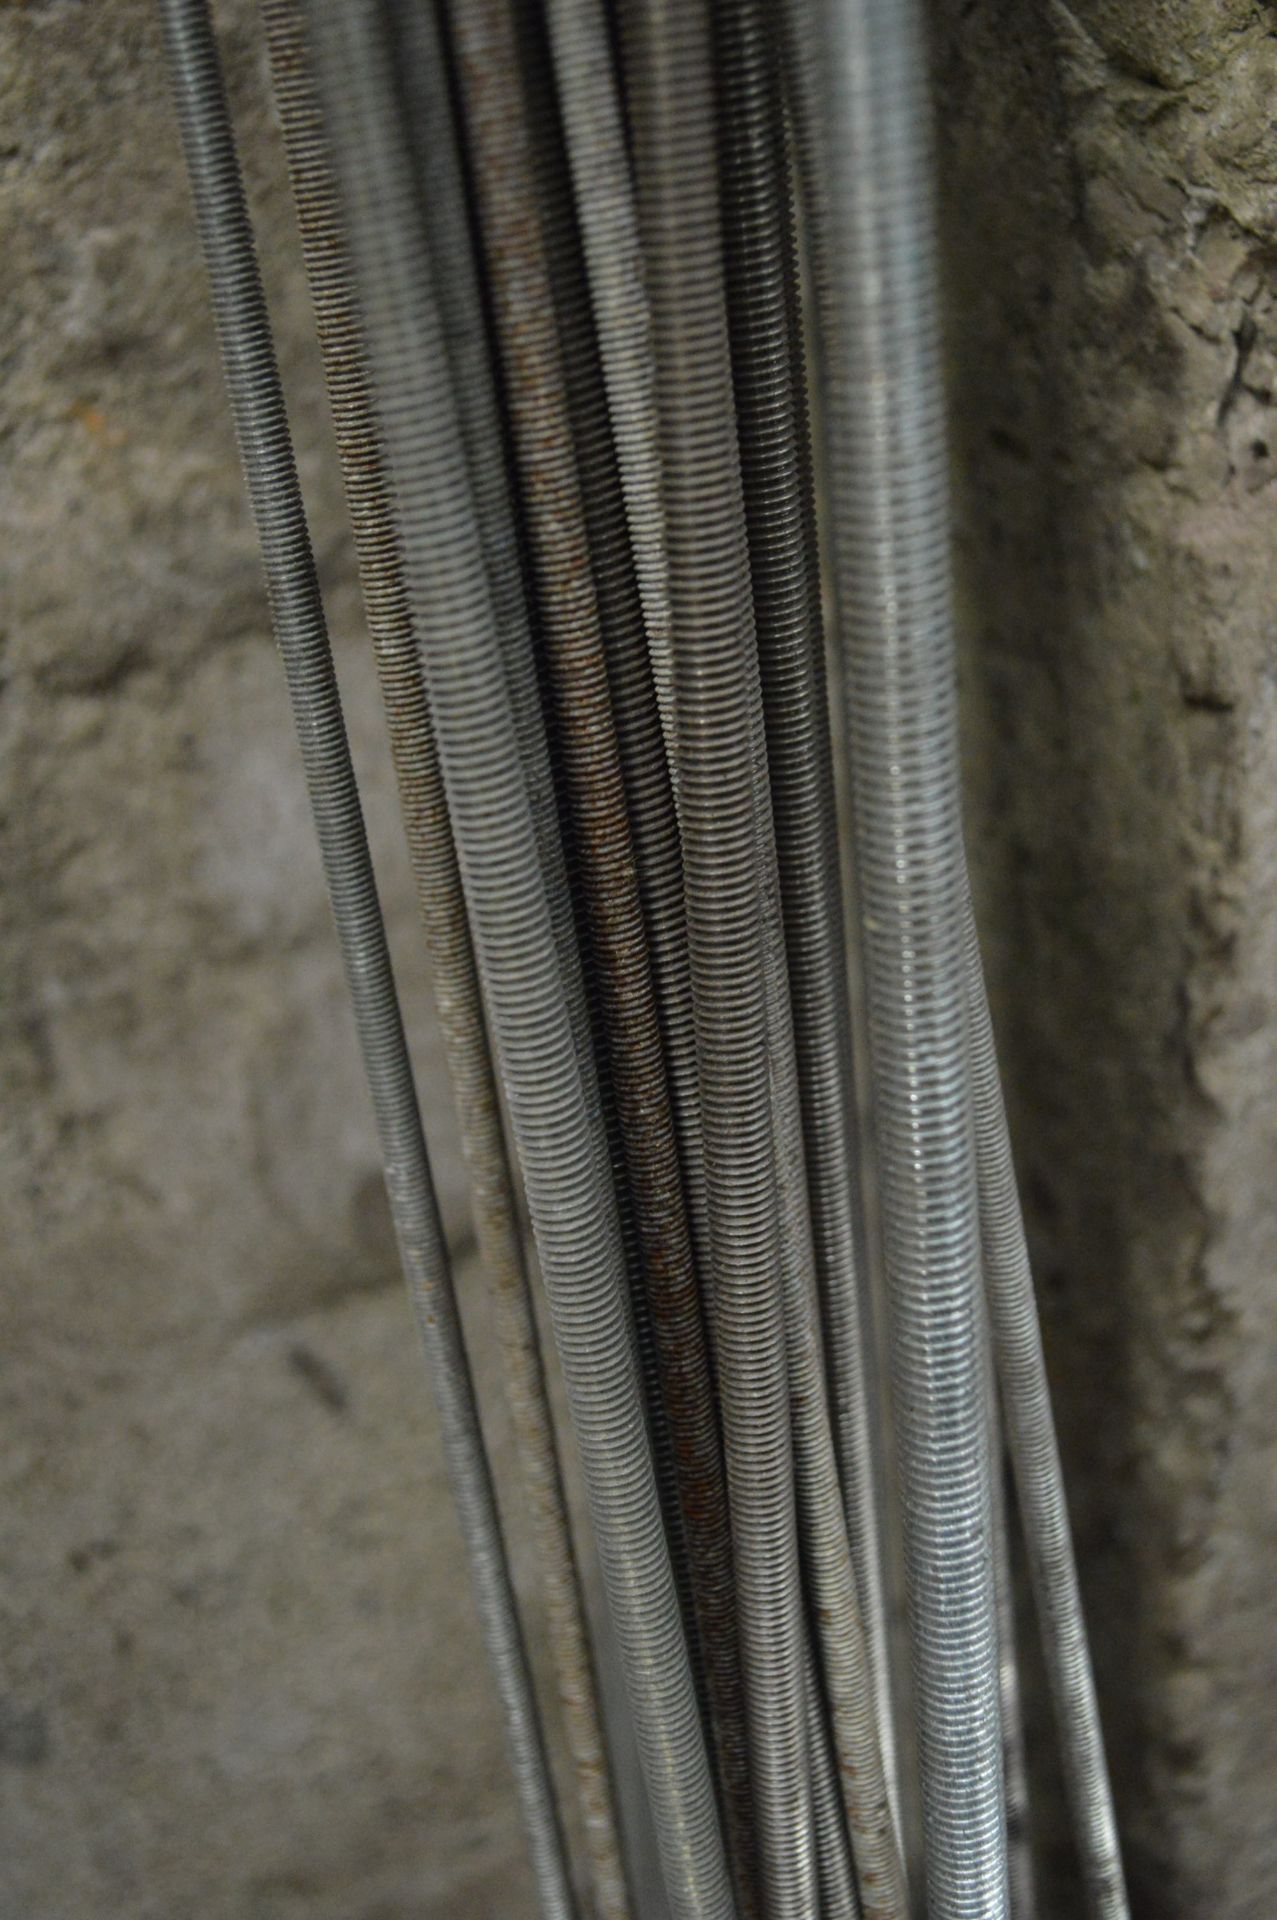 Assorted Threaded Bar, as set out against wall - Image 2 of 2